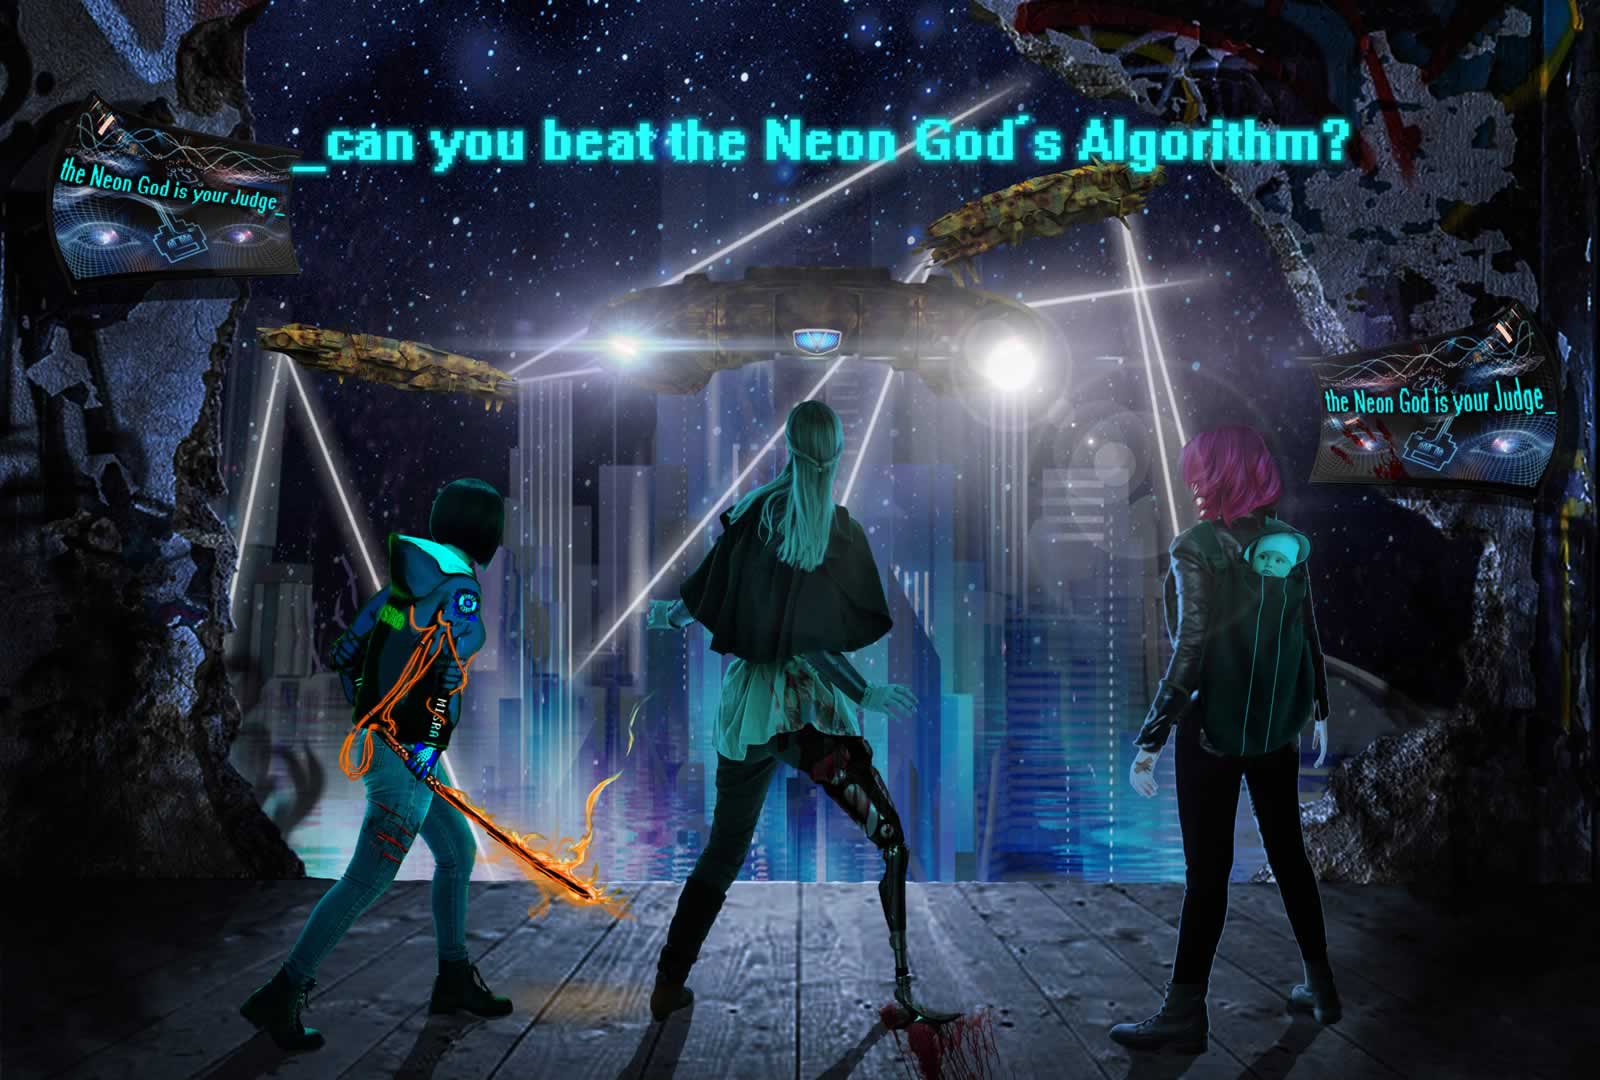 Neon Science Fiction in Five Stars: Can you beat the Neon God's Aerodynes?